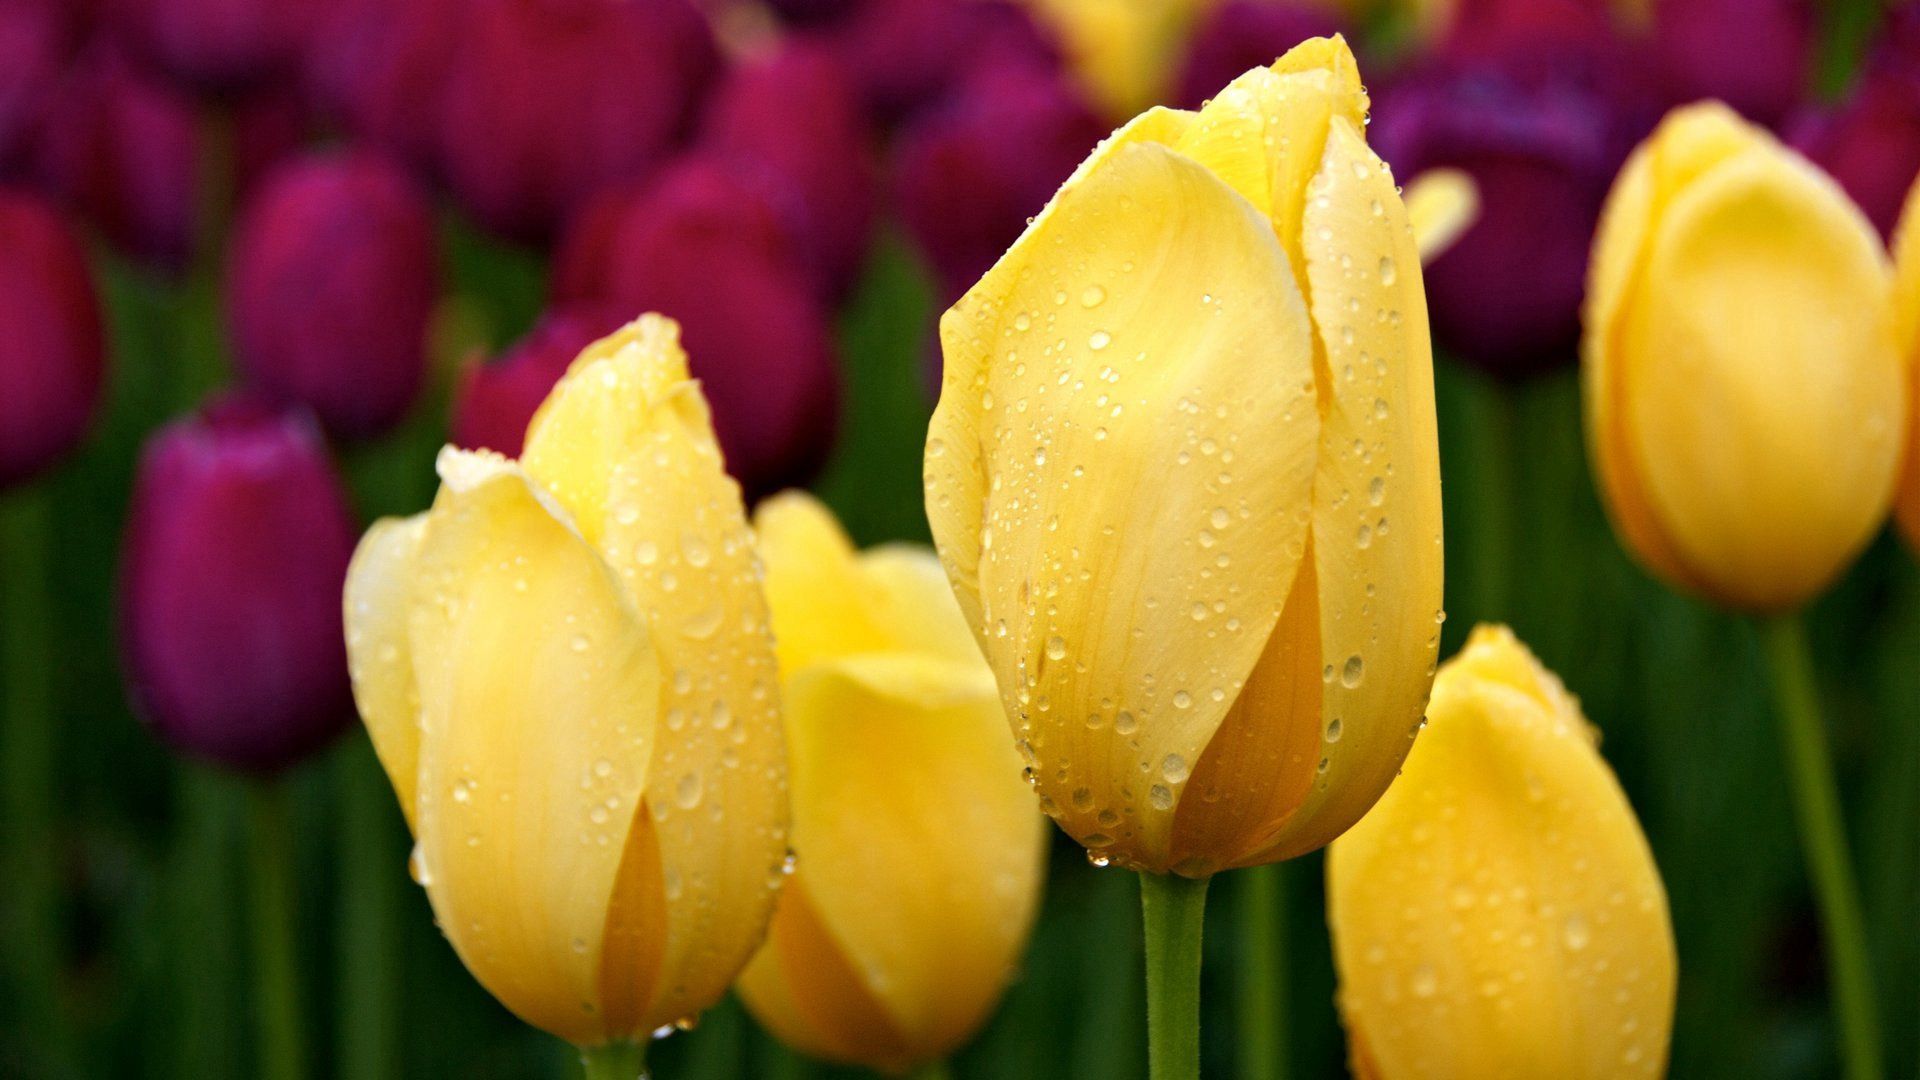 PC Wallpapers drops, greens, flowers, tulips, buds, different